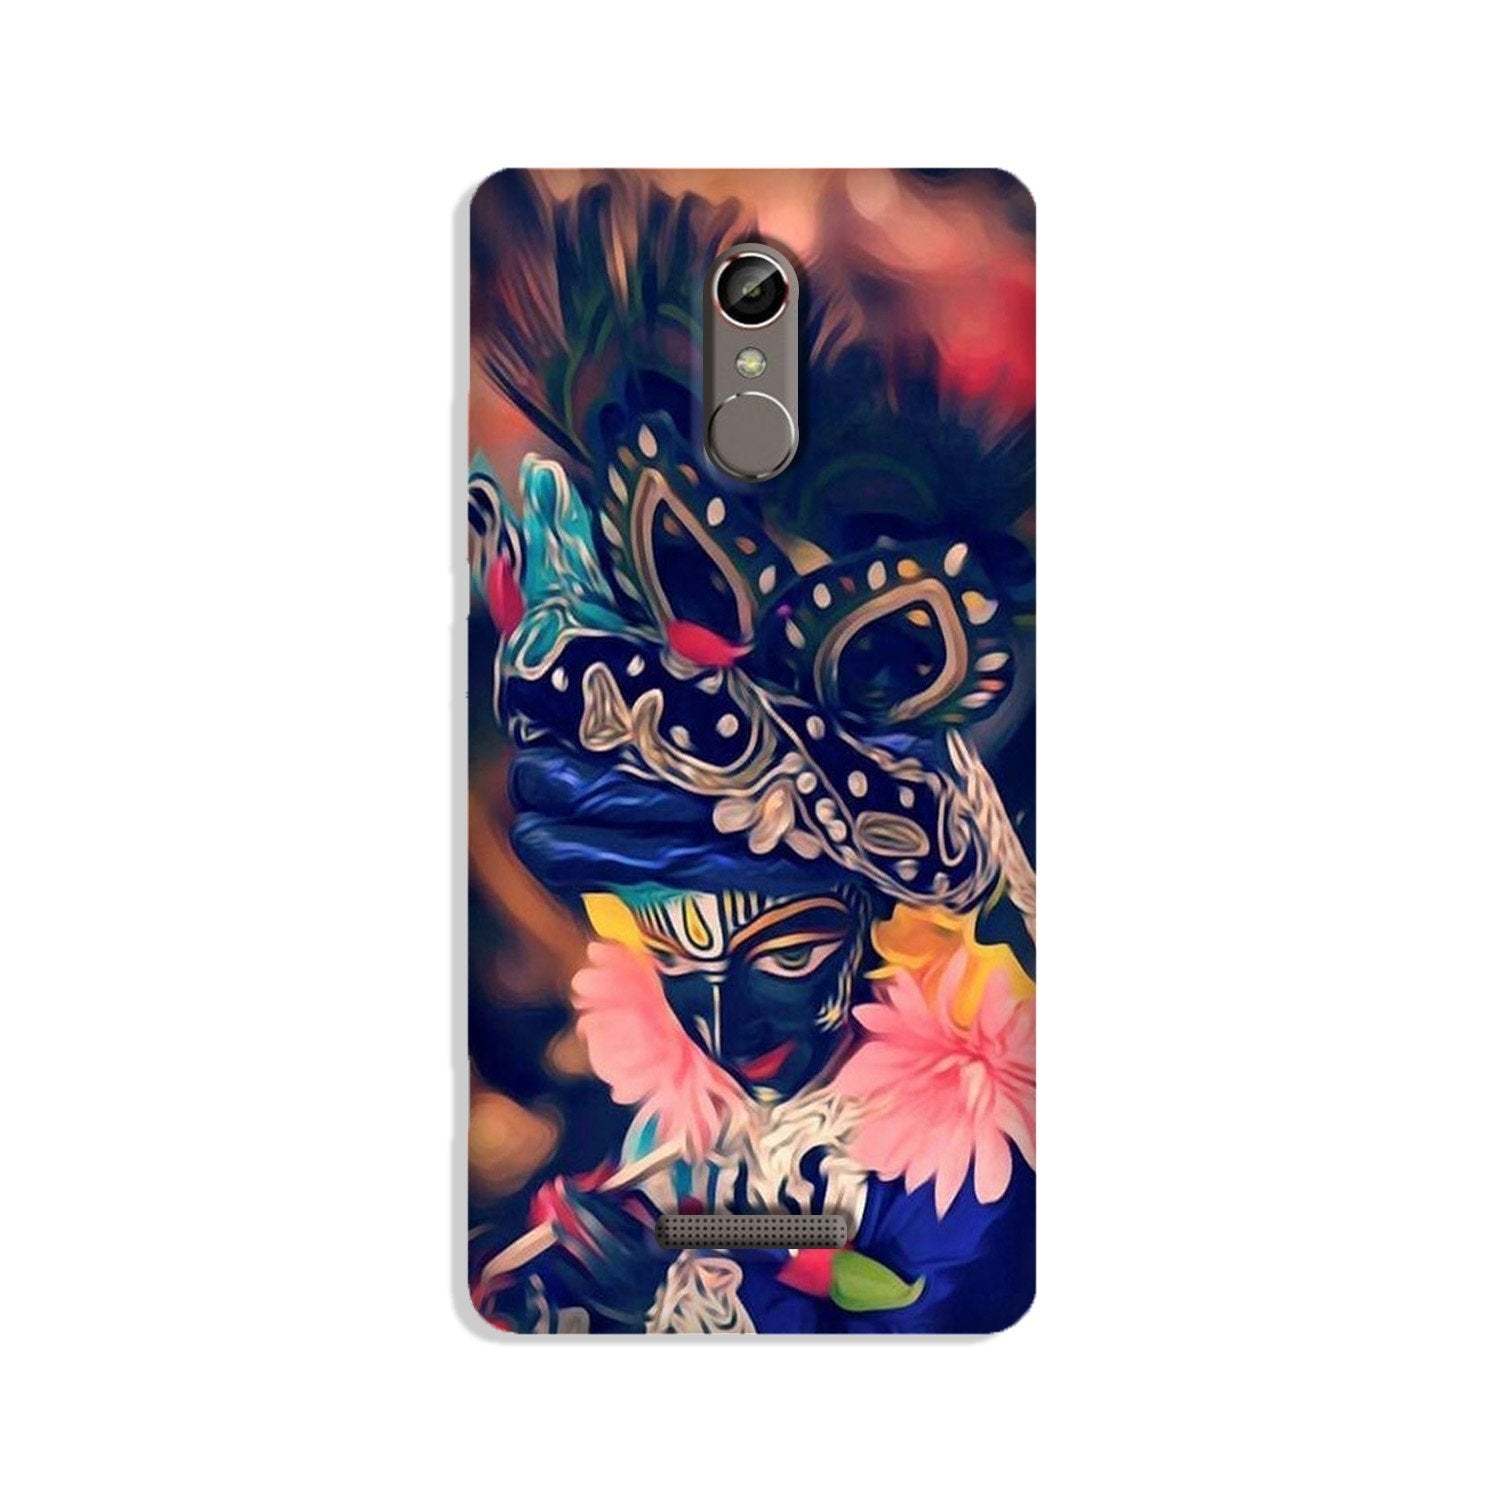 Lord Krishna Case for Gionee S6s